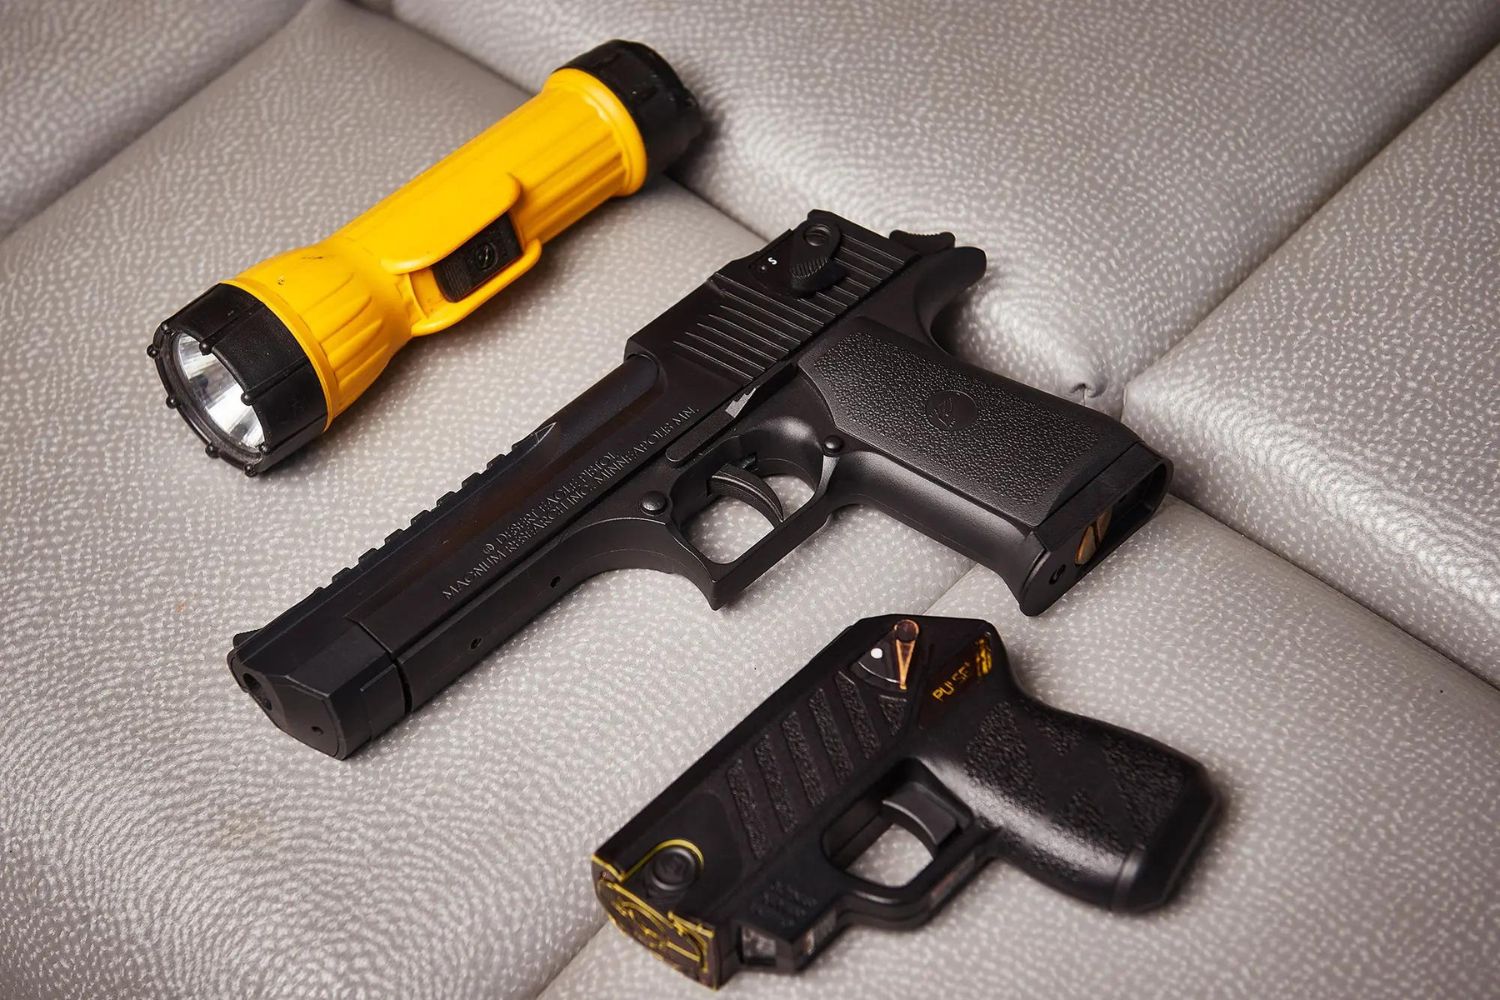 What Should I Know About Tasers And Stun Guns For Home Protection?